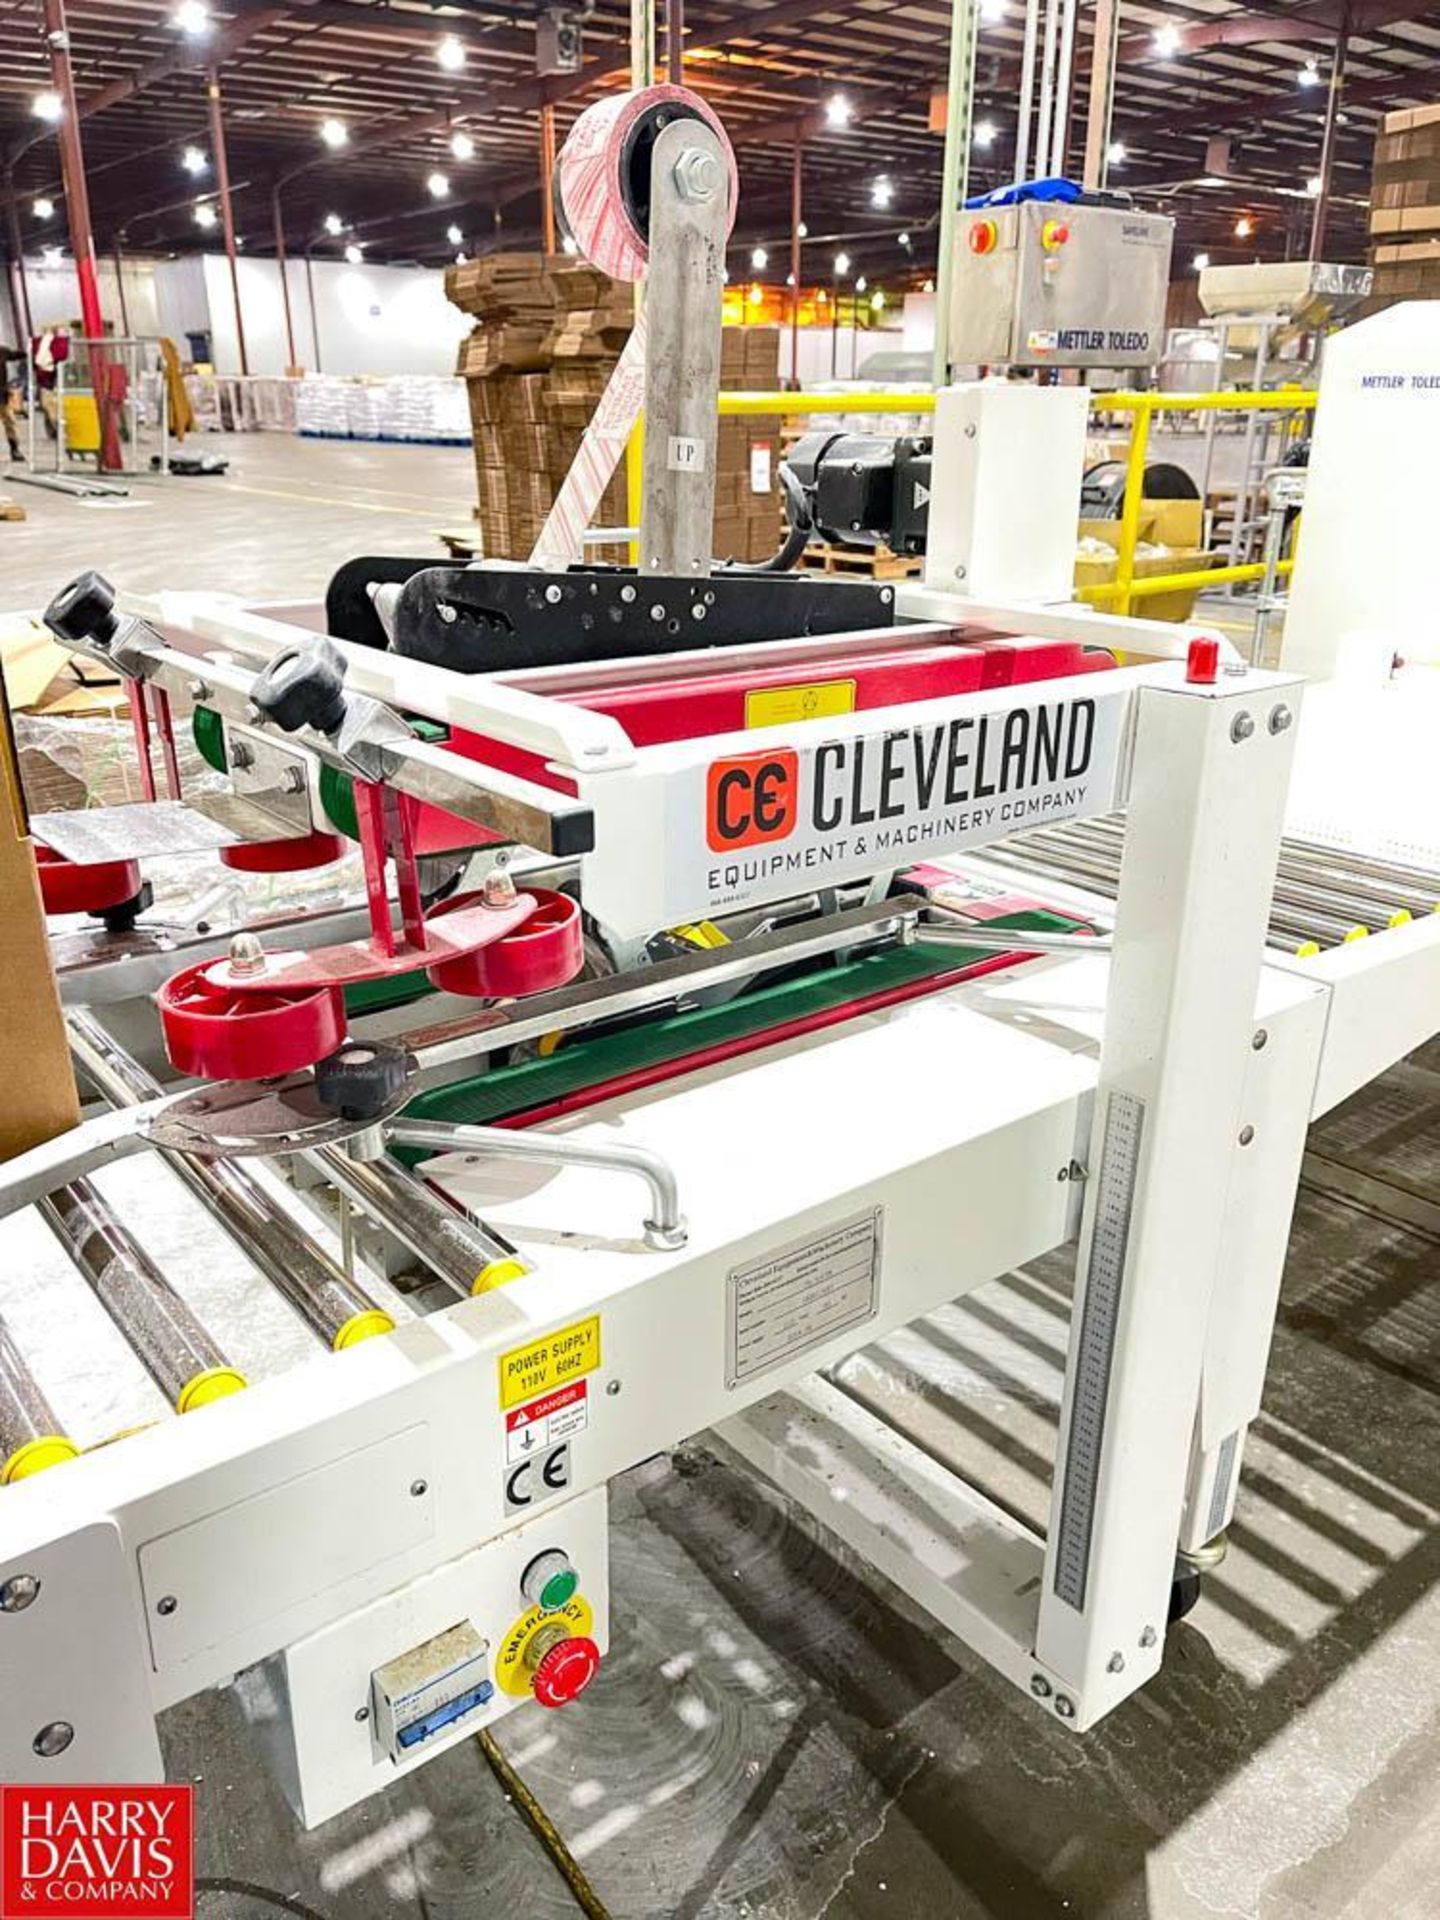 Cleveland Top and Bottom Case Sealer, Model: 180613487 with Carton ERECTOR and Roller Conveyor - Image 2 of 3